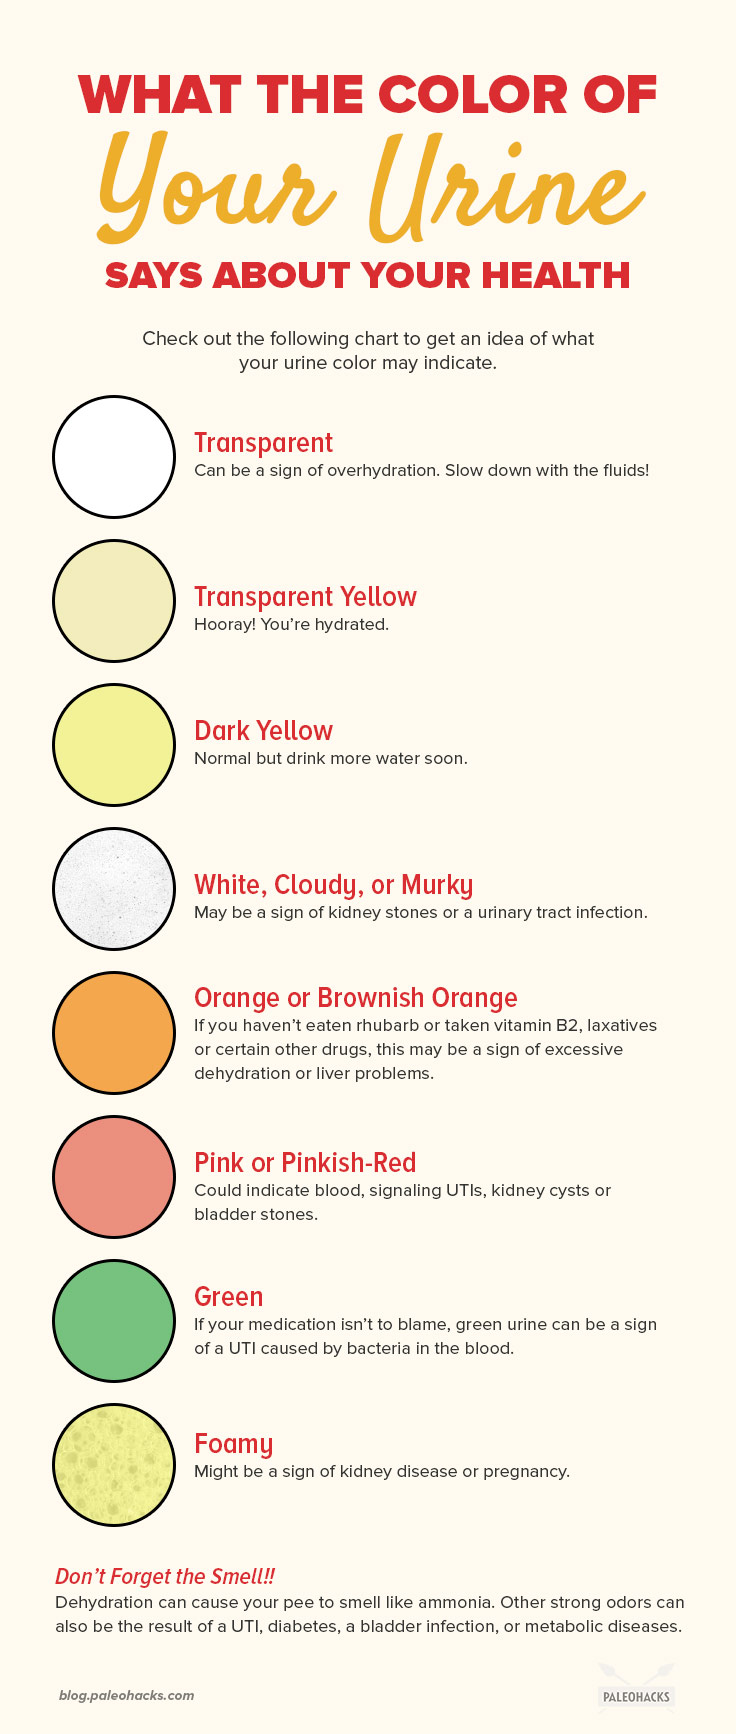 What The Color of Your Urine Says About Your Health - Small Joys